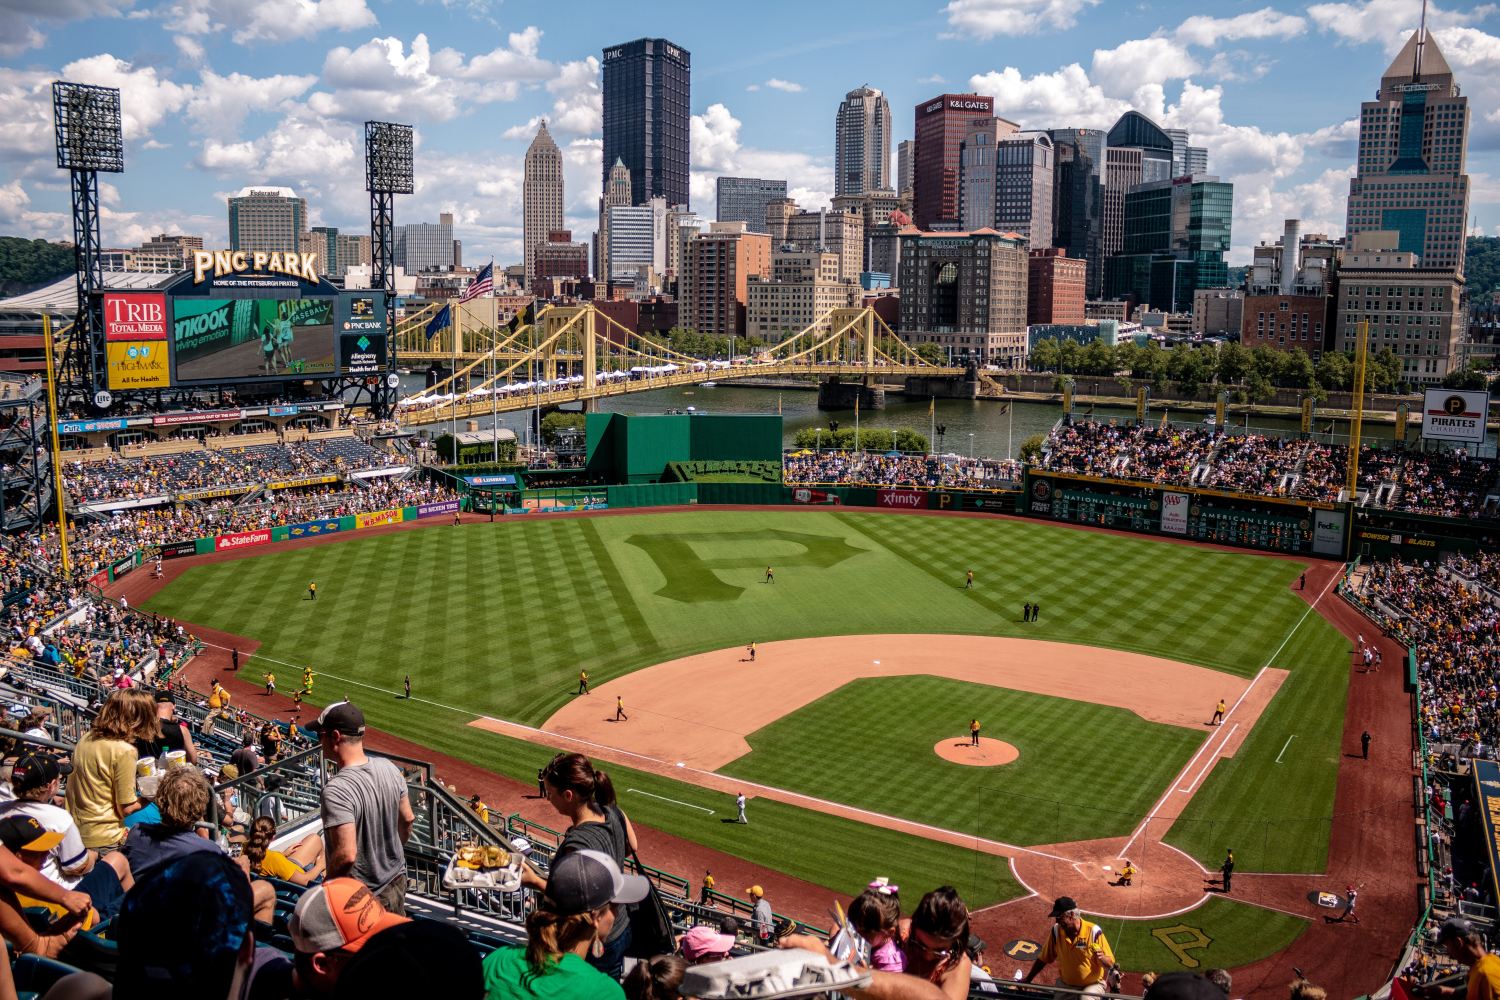 PNC Park in Pittsburgh, PA